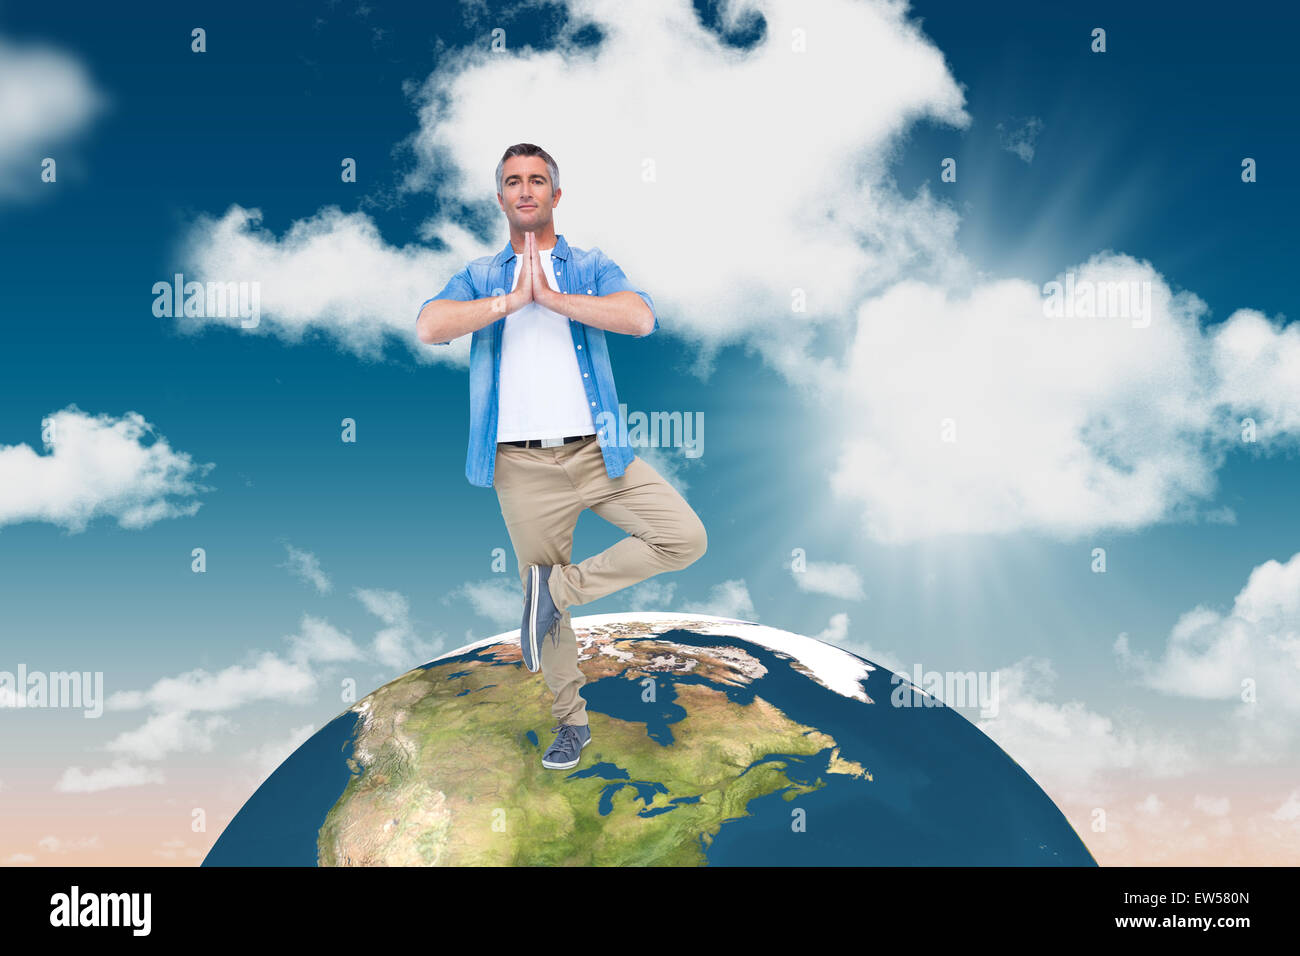 Composite image of man with grey hair in tree pose Stock Photo